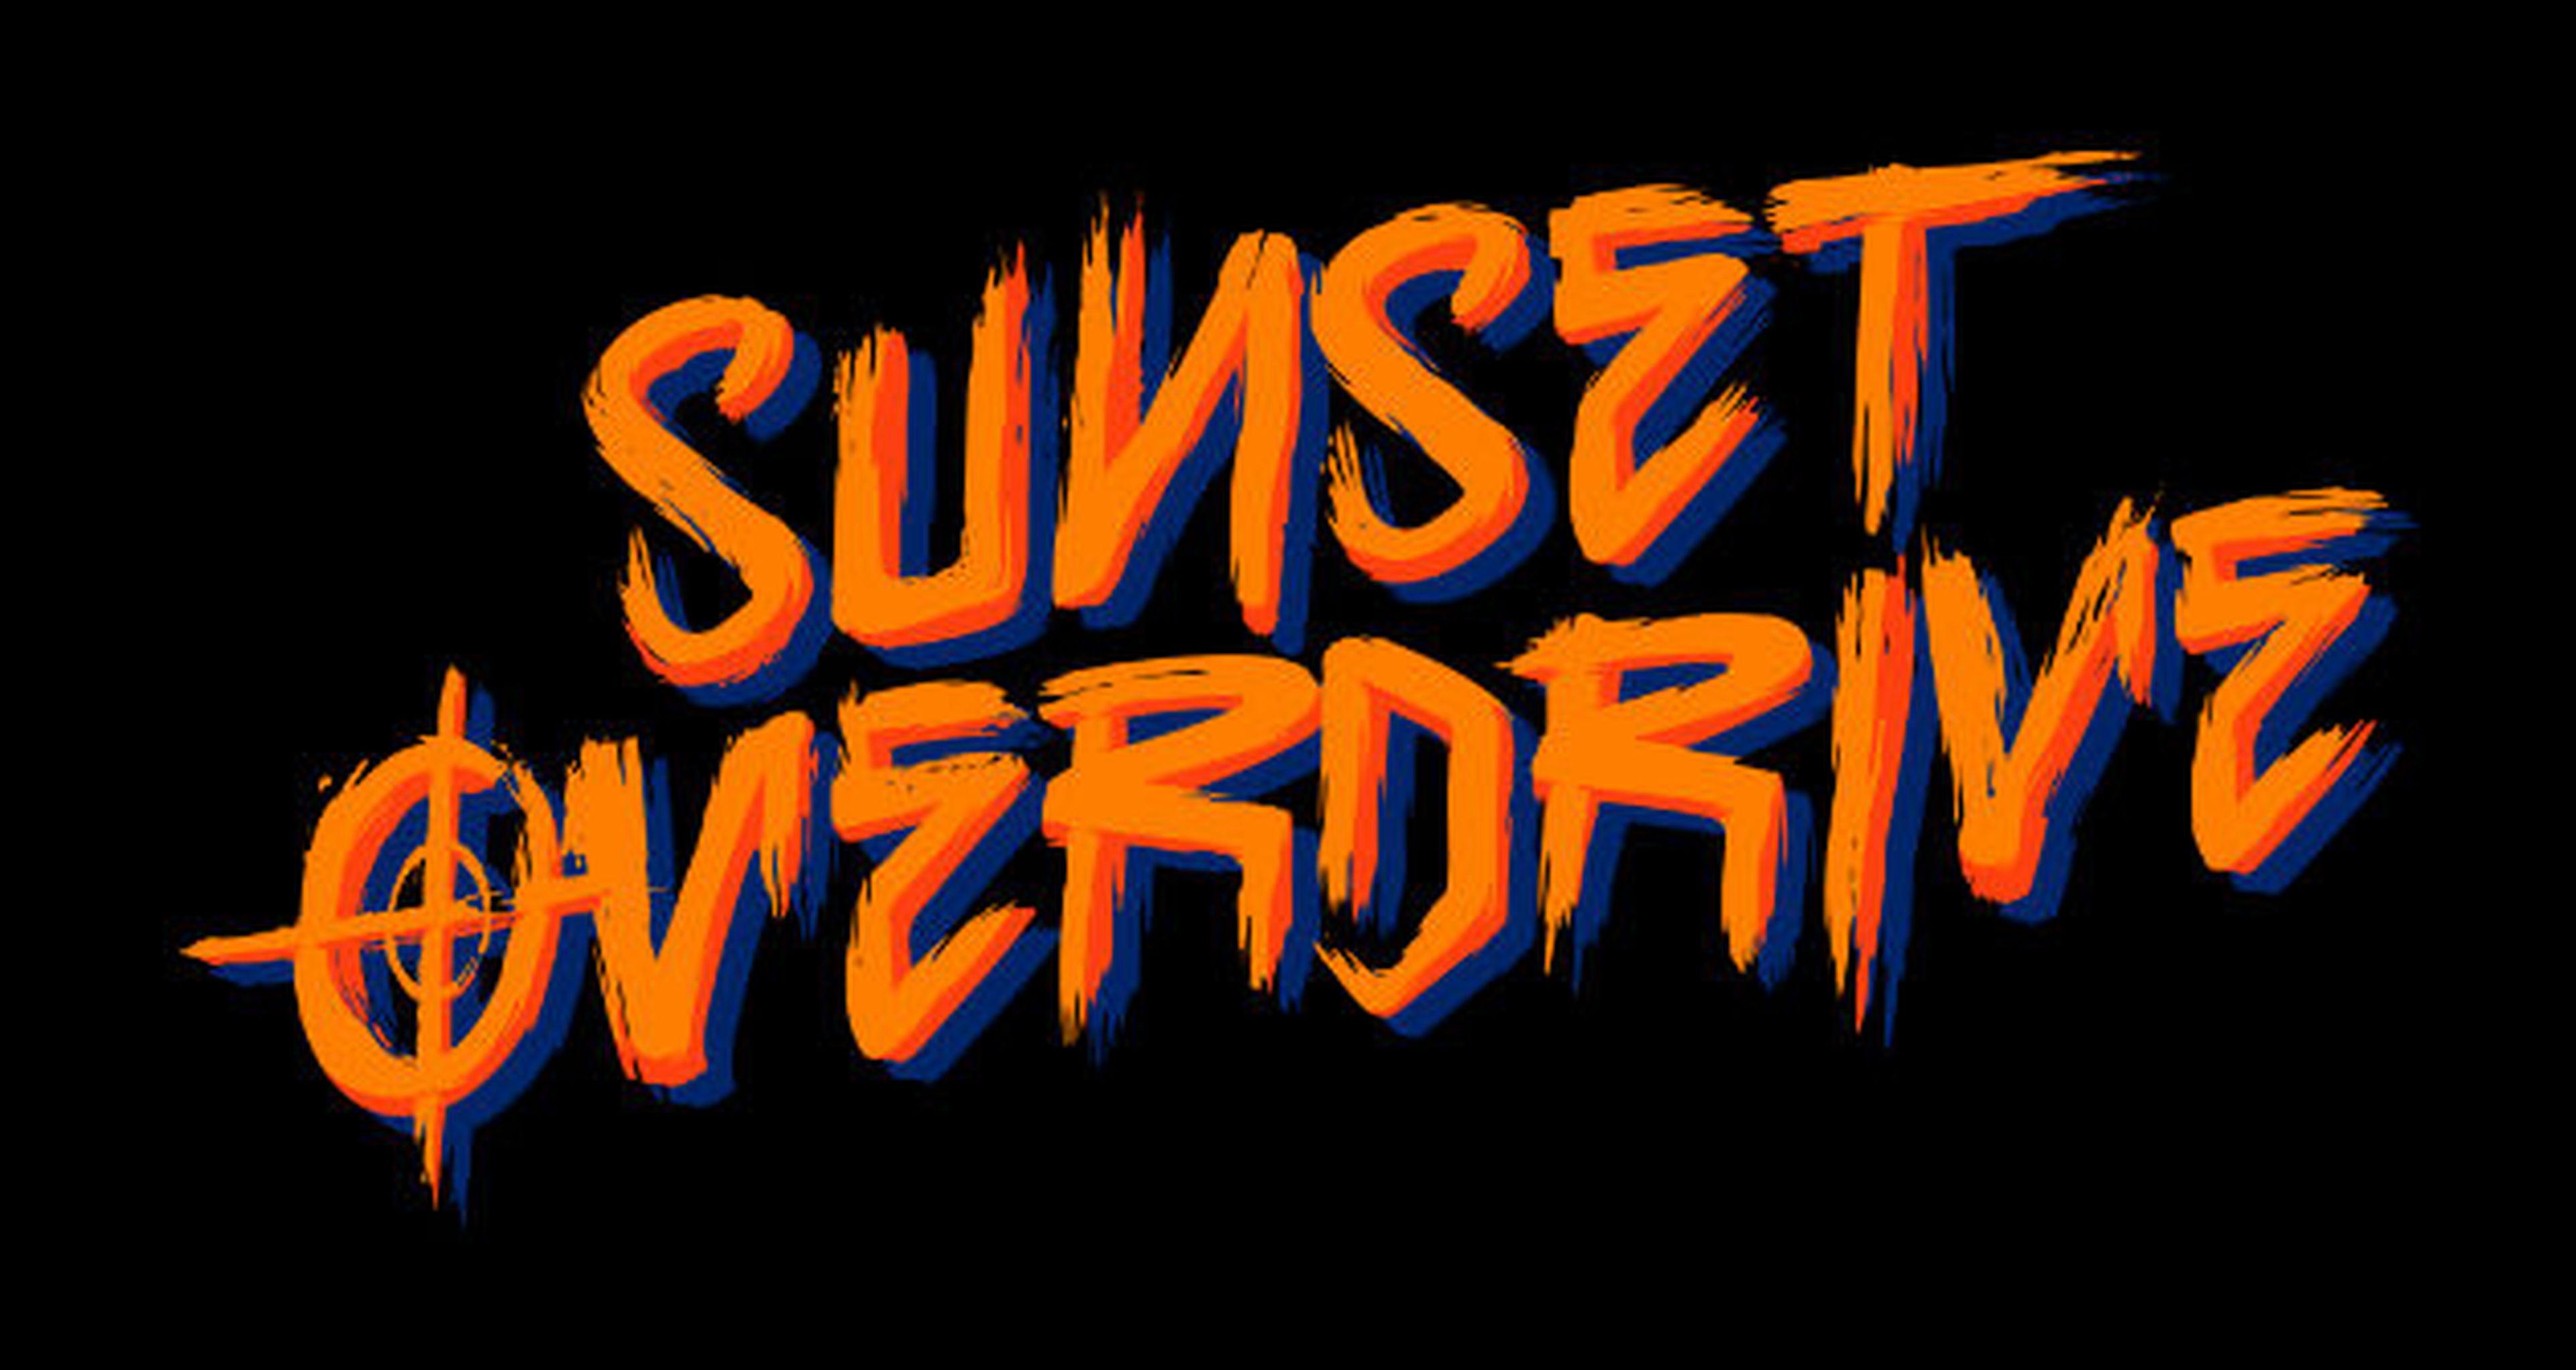 Sunset Overdrive correrá a 30 fps y 1080p en Xbox One